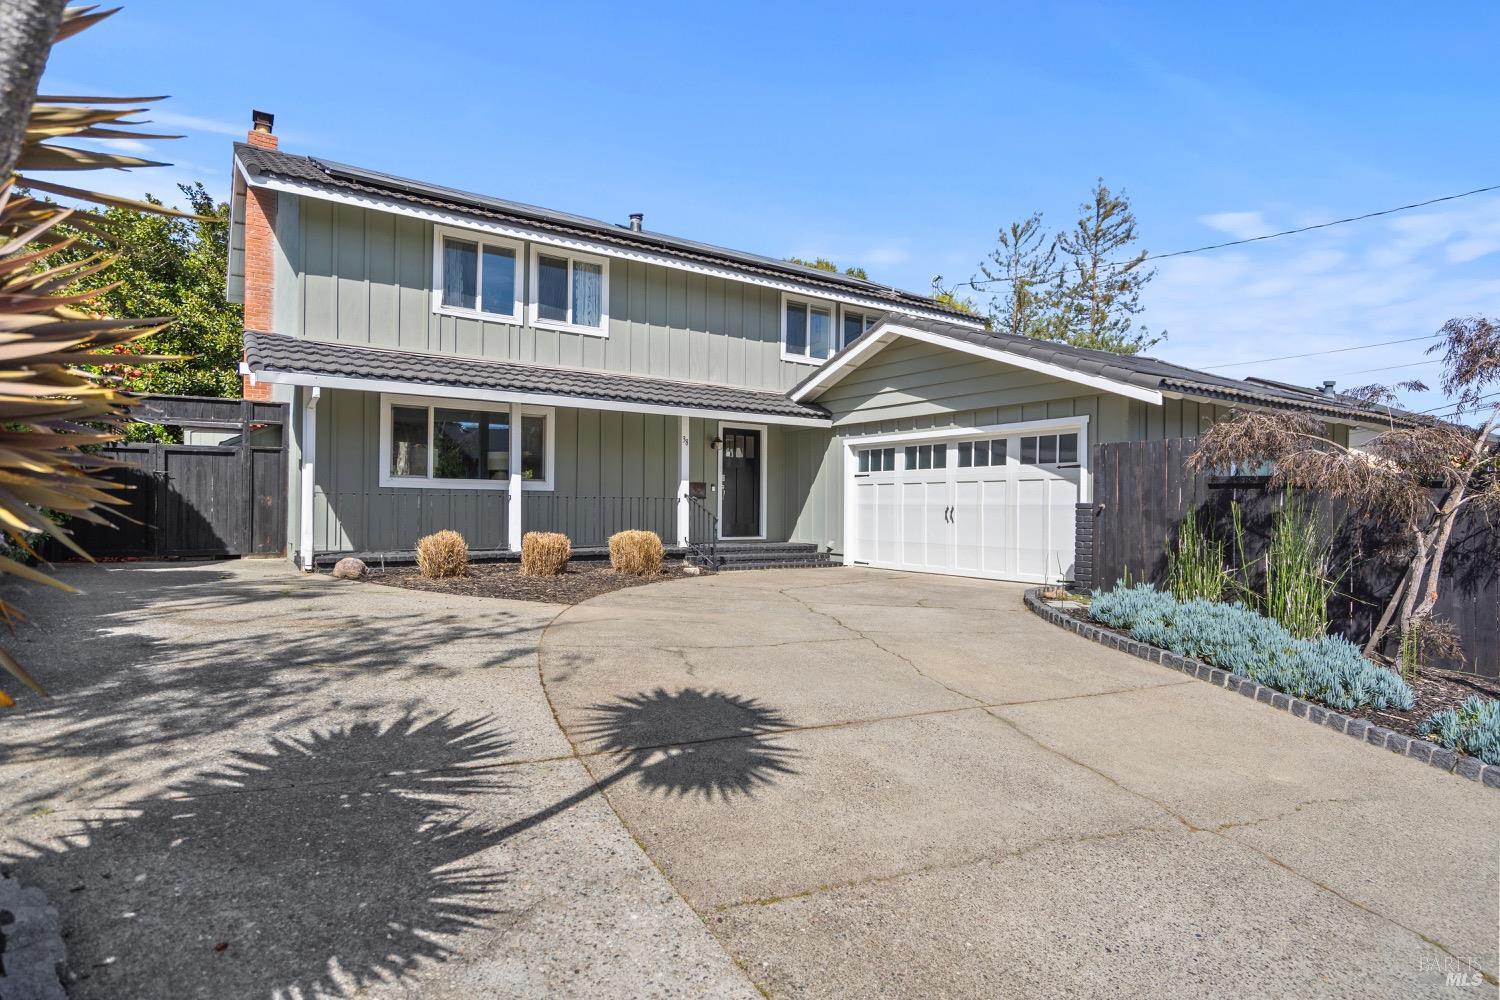 This 5BR/2.5BA home,  located in the Mont Marin neighborhood of San Rafael, boasts a spacious chef's kitchen, updated baths, owned solar, a pool and much more!